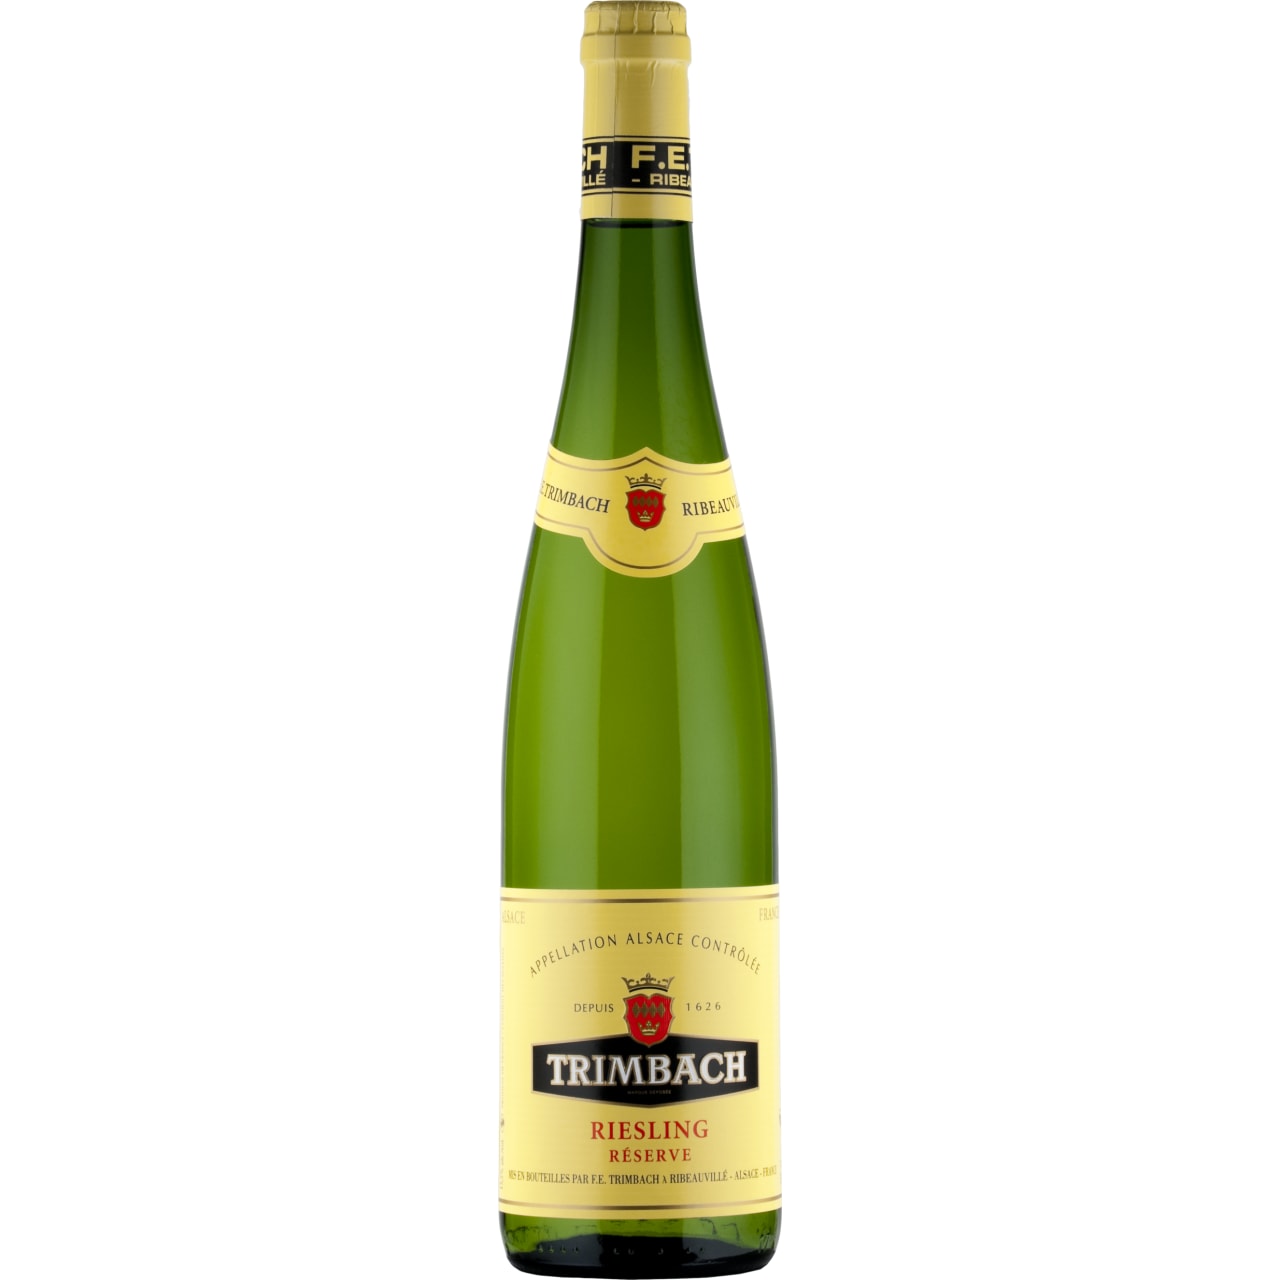 Stylish, elegant and pure - benchmark Alsatian Riesling!